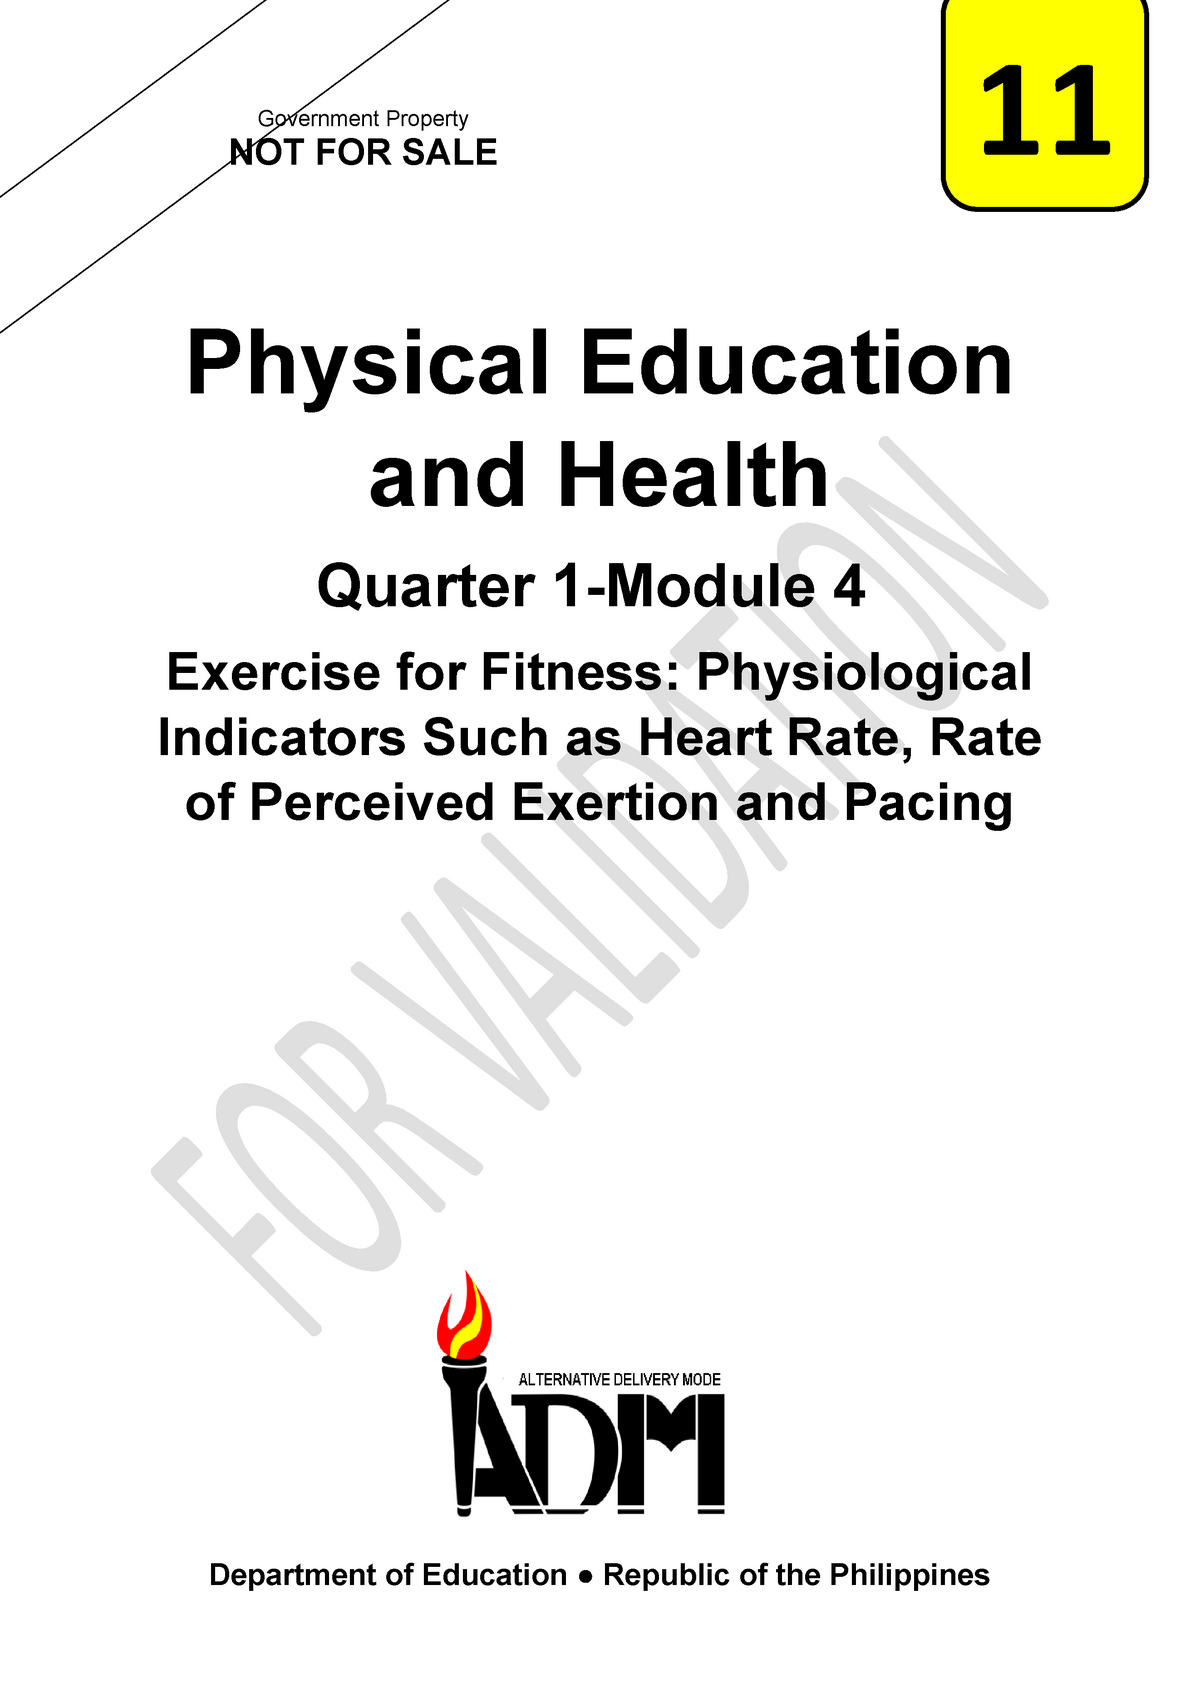 Peh 11 Quarter 1 Module 4 Physical Education And Health Quarter 1 Module 4 Exercise For 5909